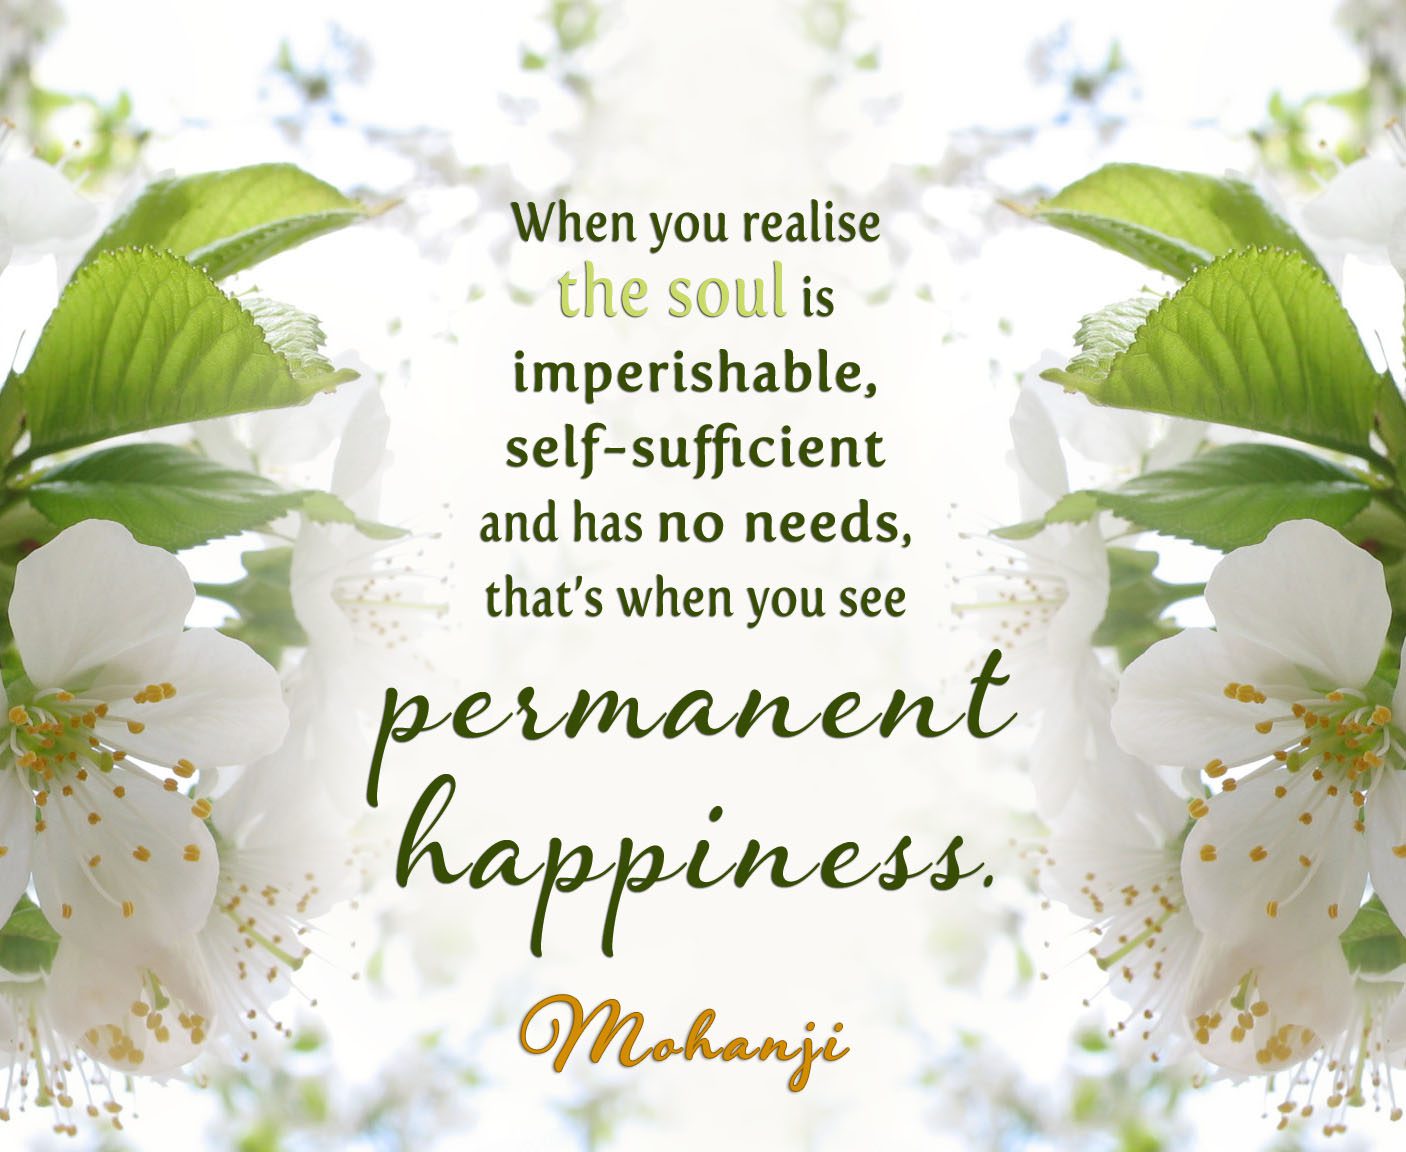 mohanji-quote-when-you-realise-the-soul-is-imperishable